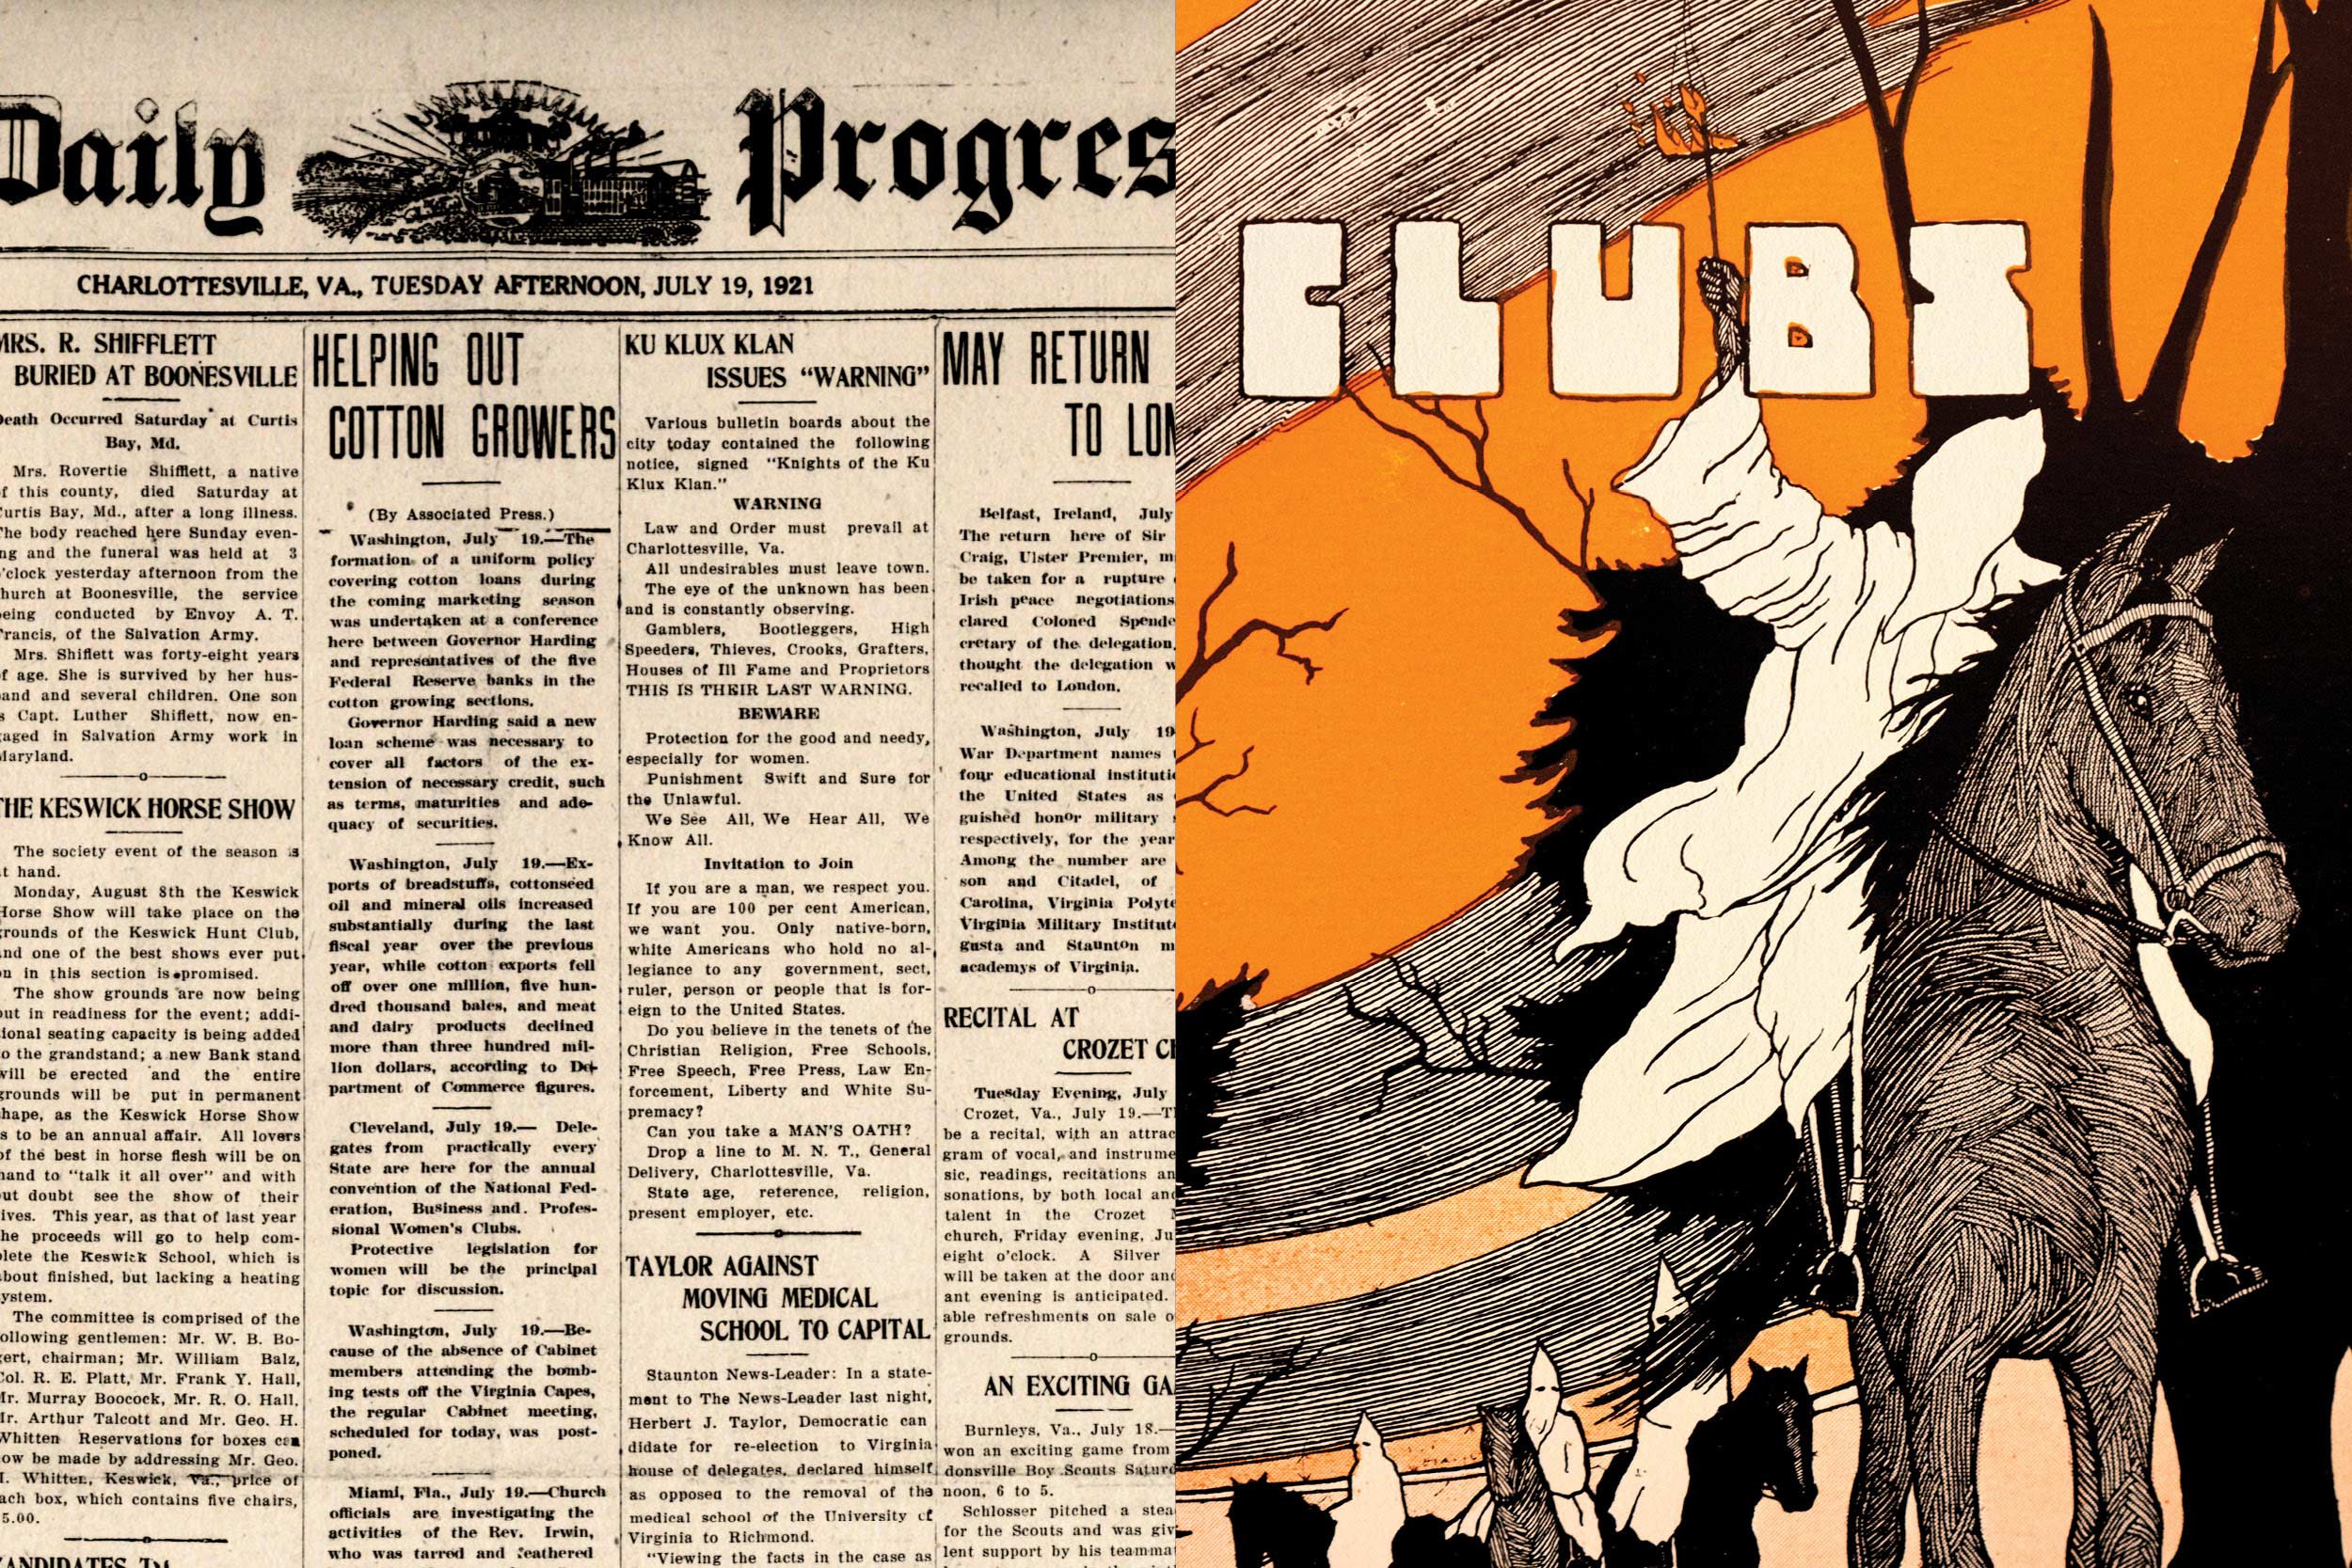 Left: Old Daily progess newspaper. Right: KKK image in a UVA yearbook